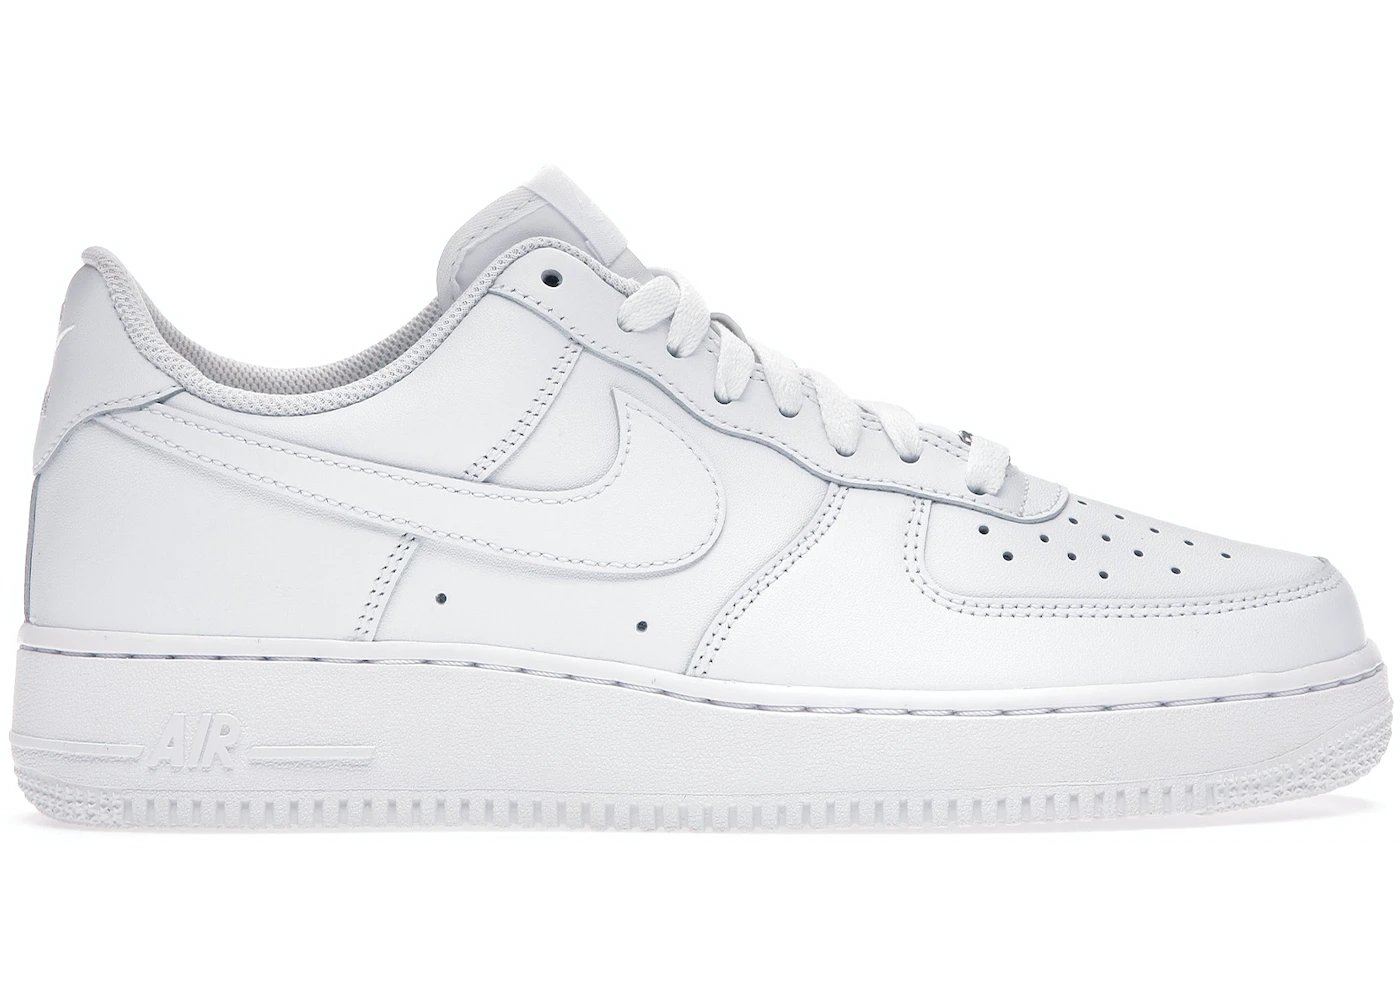 Evil Fatal Refreshing Buy Nike Air Force 1 - Low White